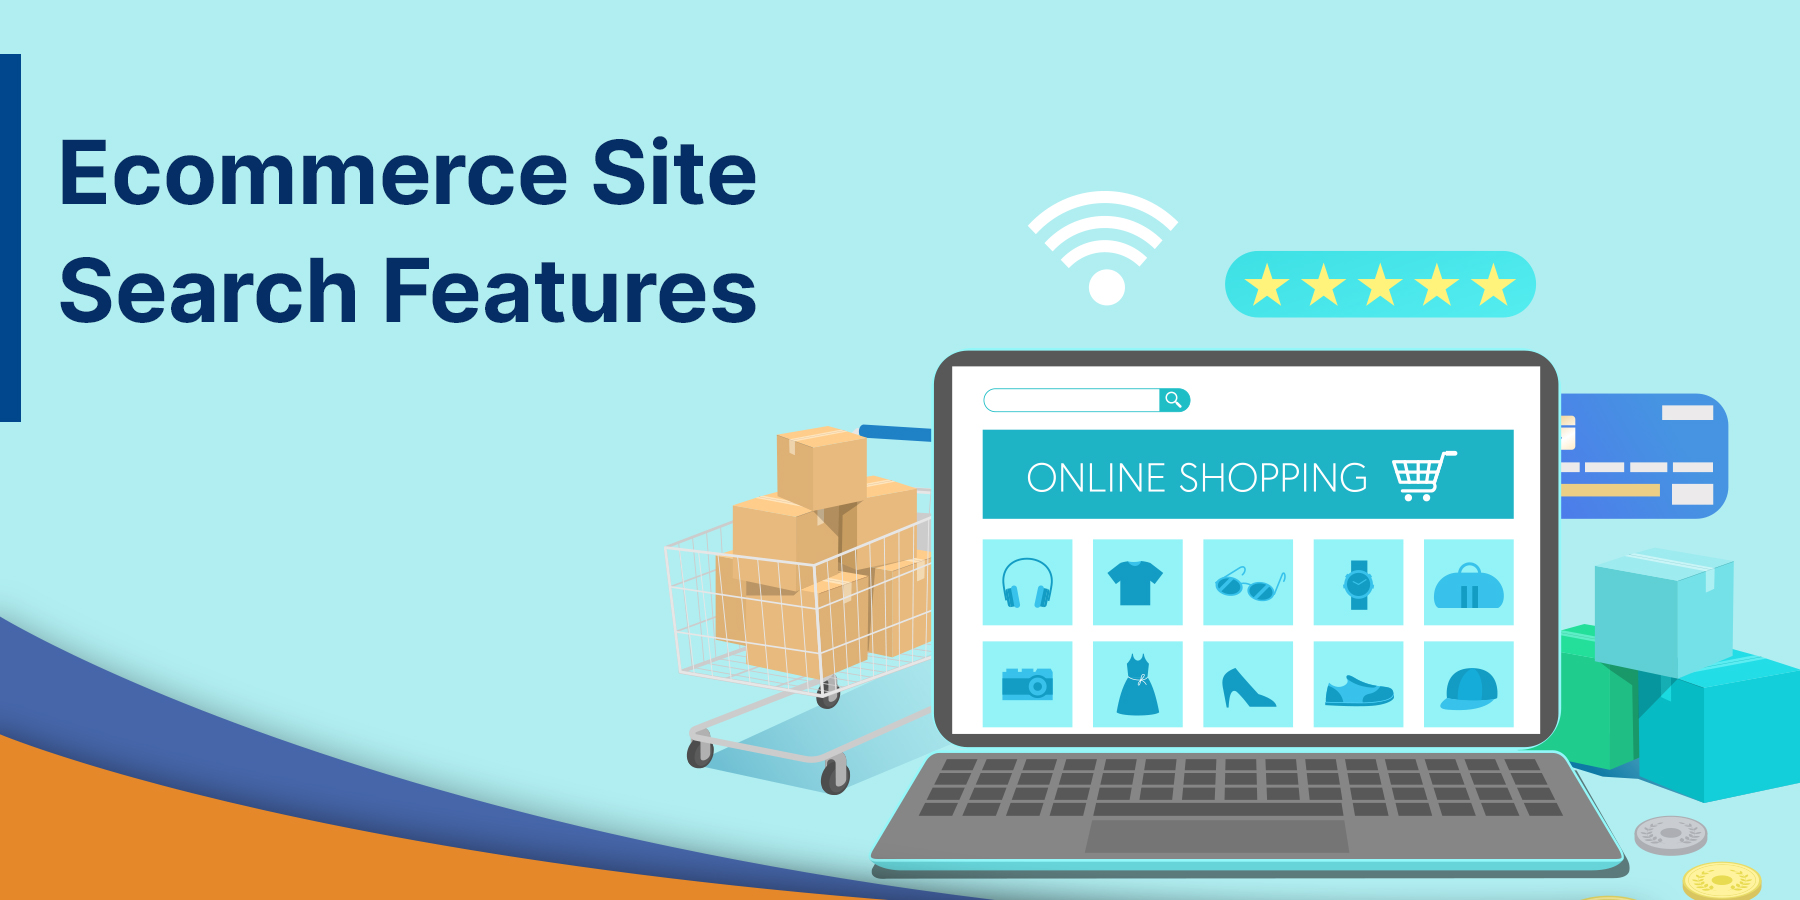 vserve | 9 Essential Tips to Maximize Your Ecommerce Customer Experience